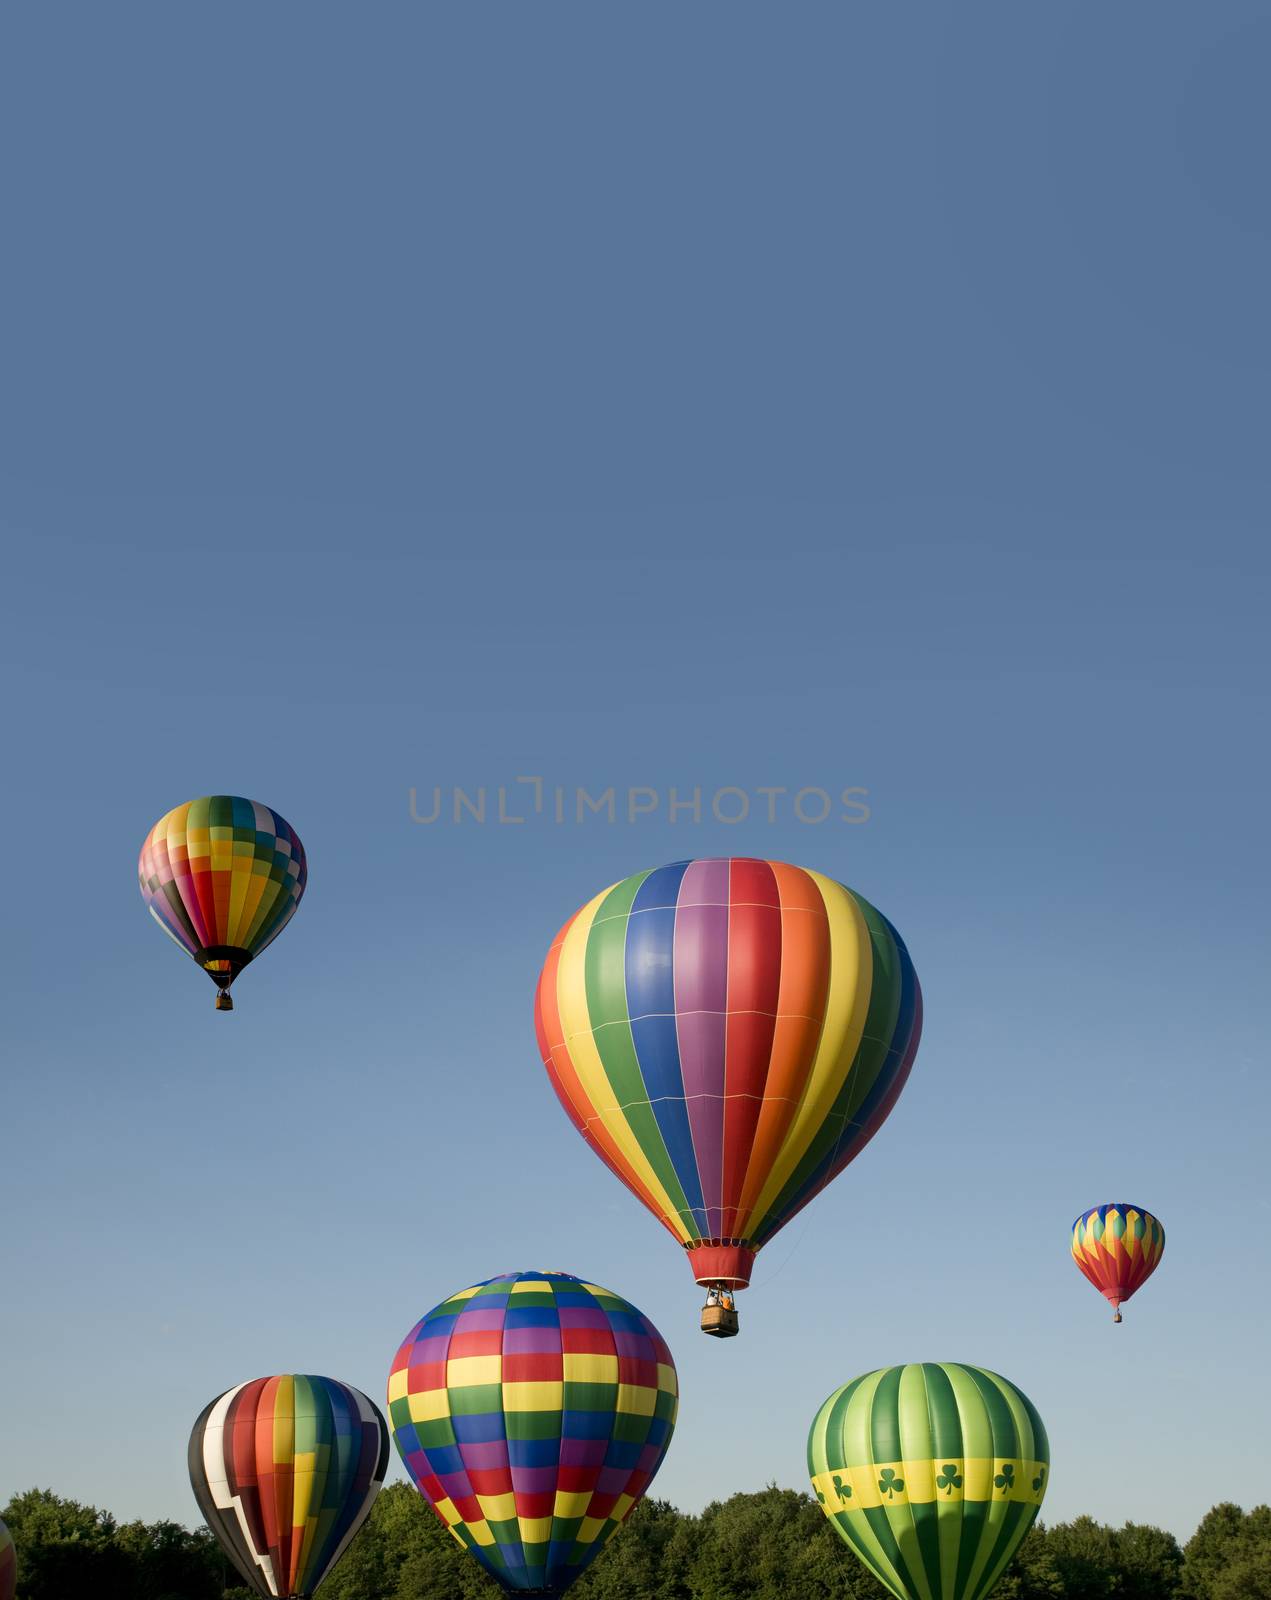 Hot-air balloons ascending or launching at a ballooning festival by Balefire9